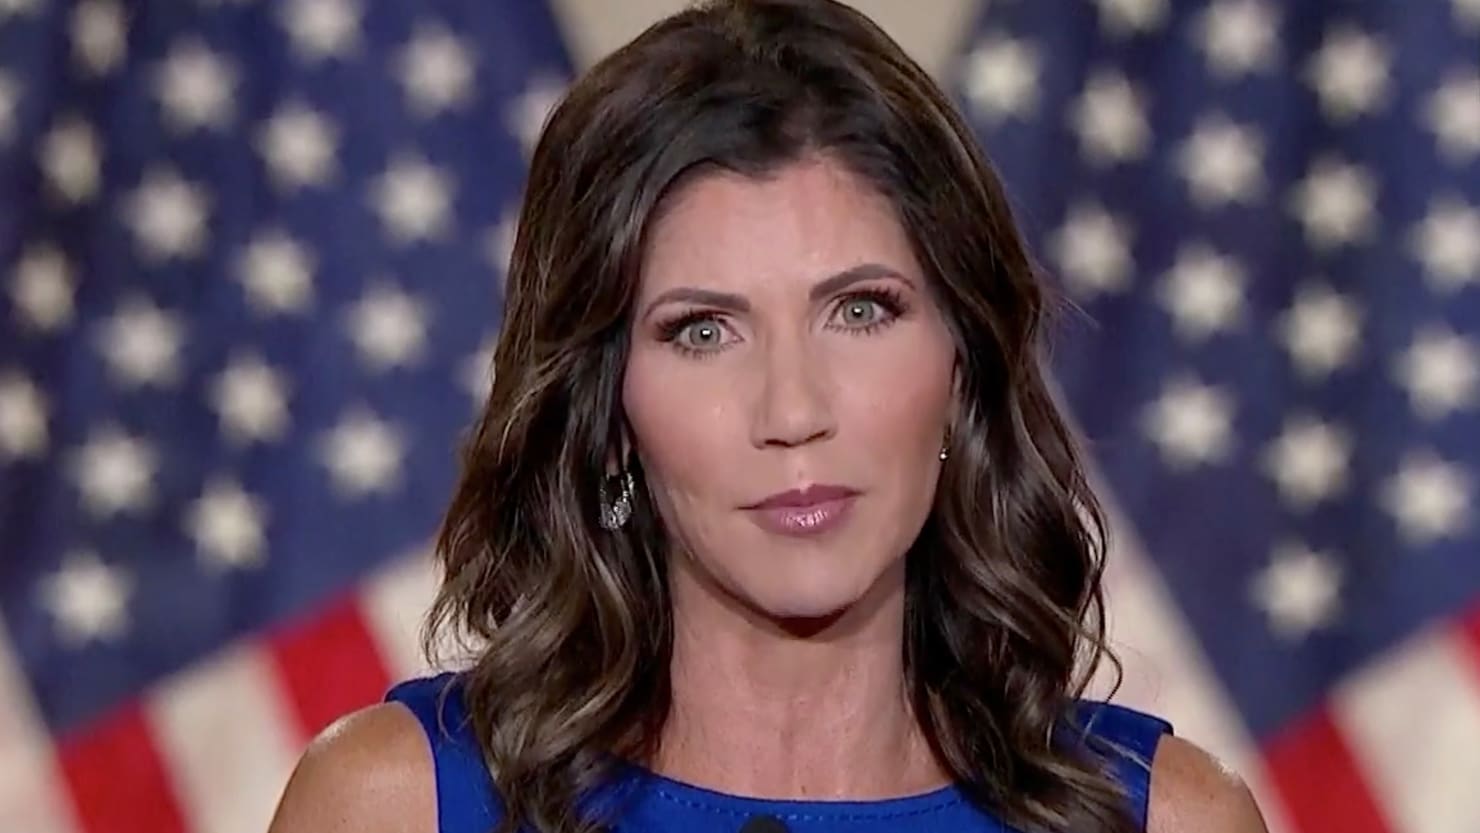 Noem Tries to Get ‘Politically Incorrect’ Cred From Killing a Dog